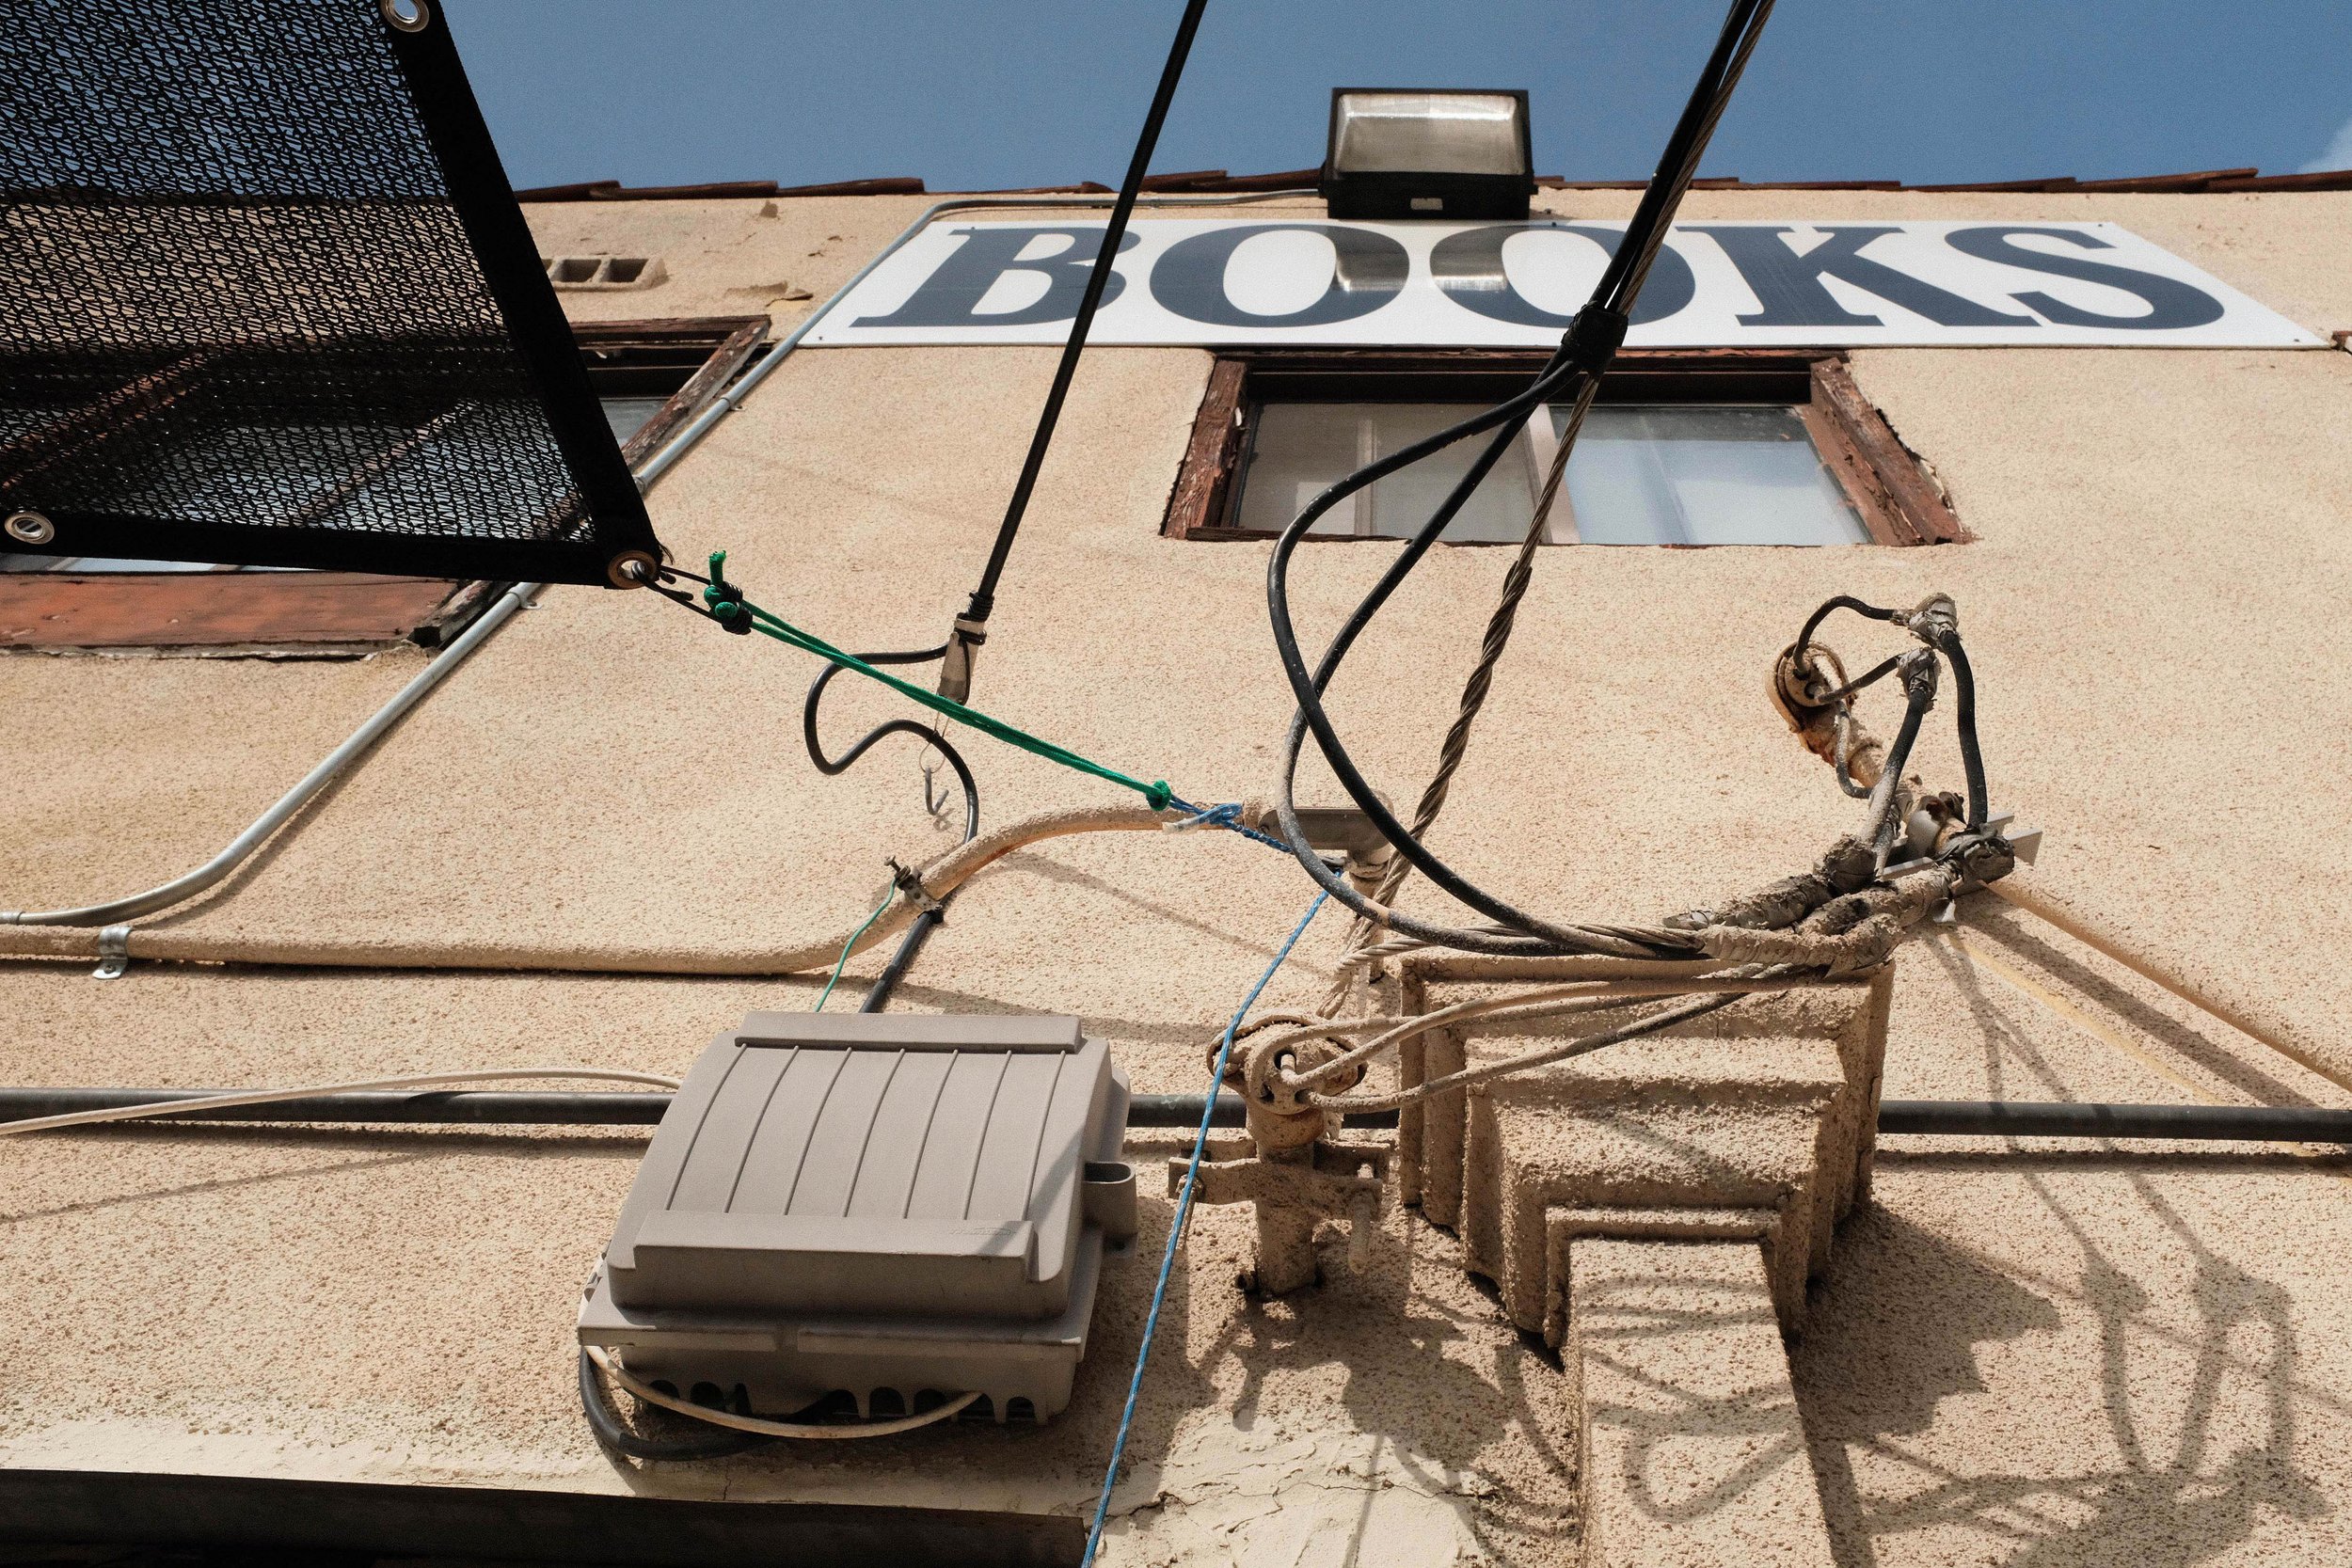  Outside of the back entrance hangs a 'Books' sign above wires, strings, and cables. Bargain Books in Van Nuys, Los Angeles, California on Friday November 19, 2021. (Anna Sophia Moltke | The Corsair)) 